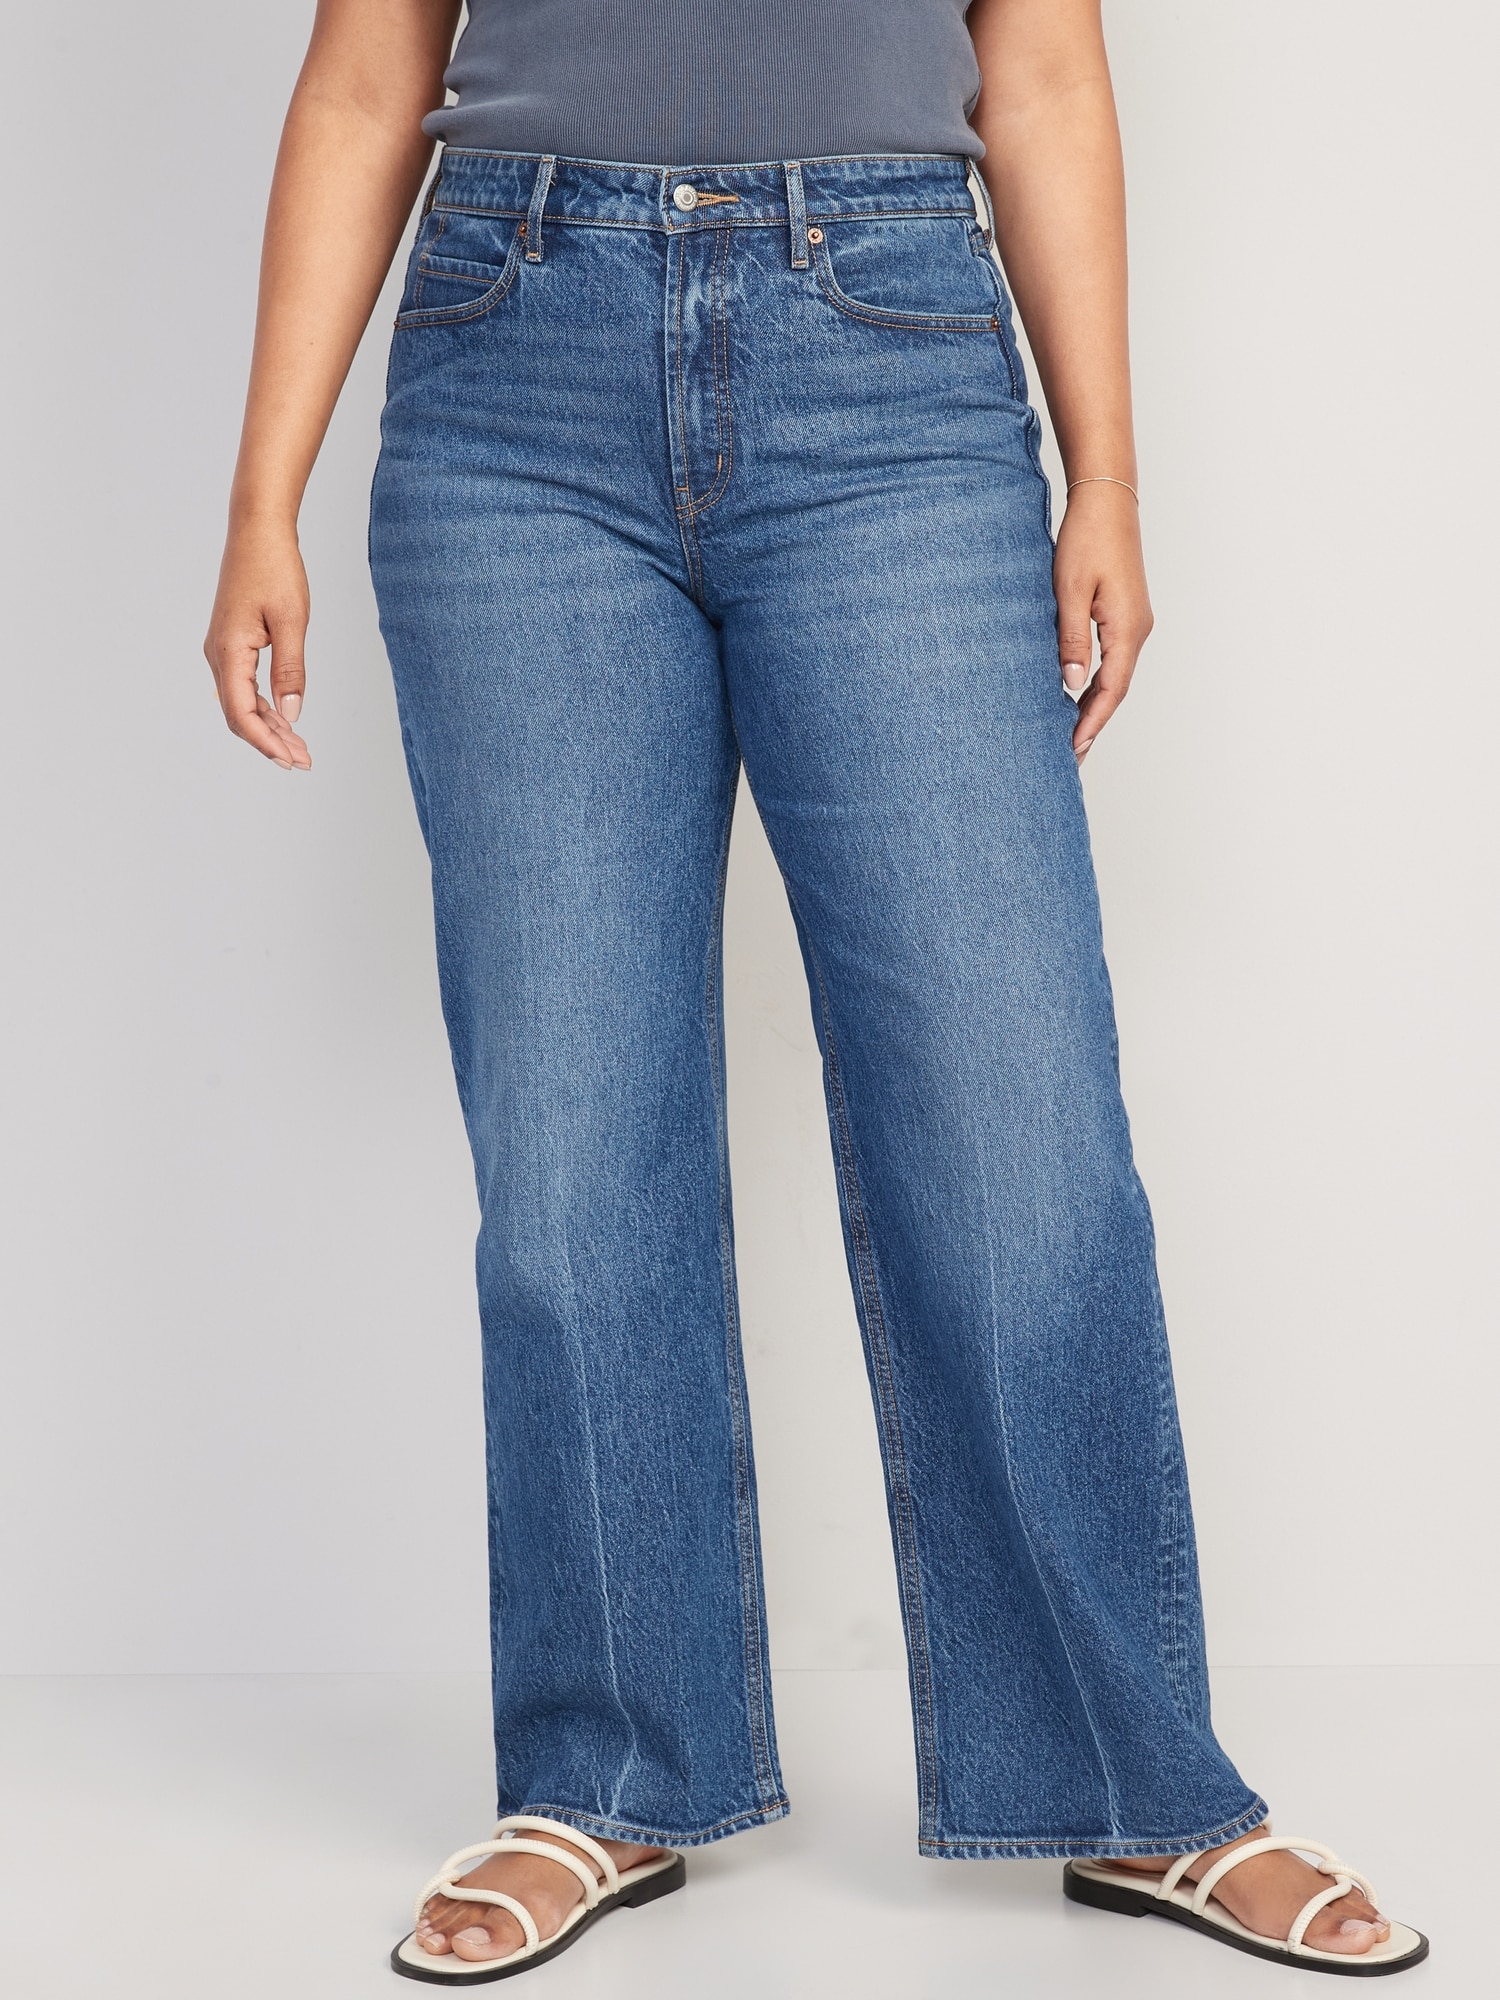 Jeans Old Navy Mujer talla 4